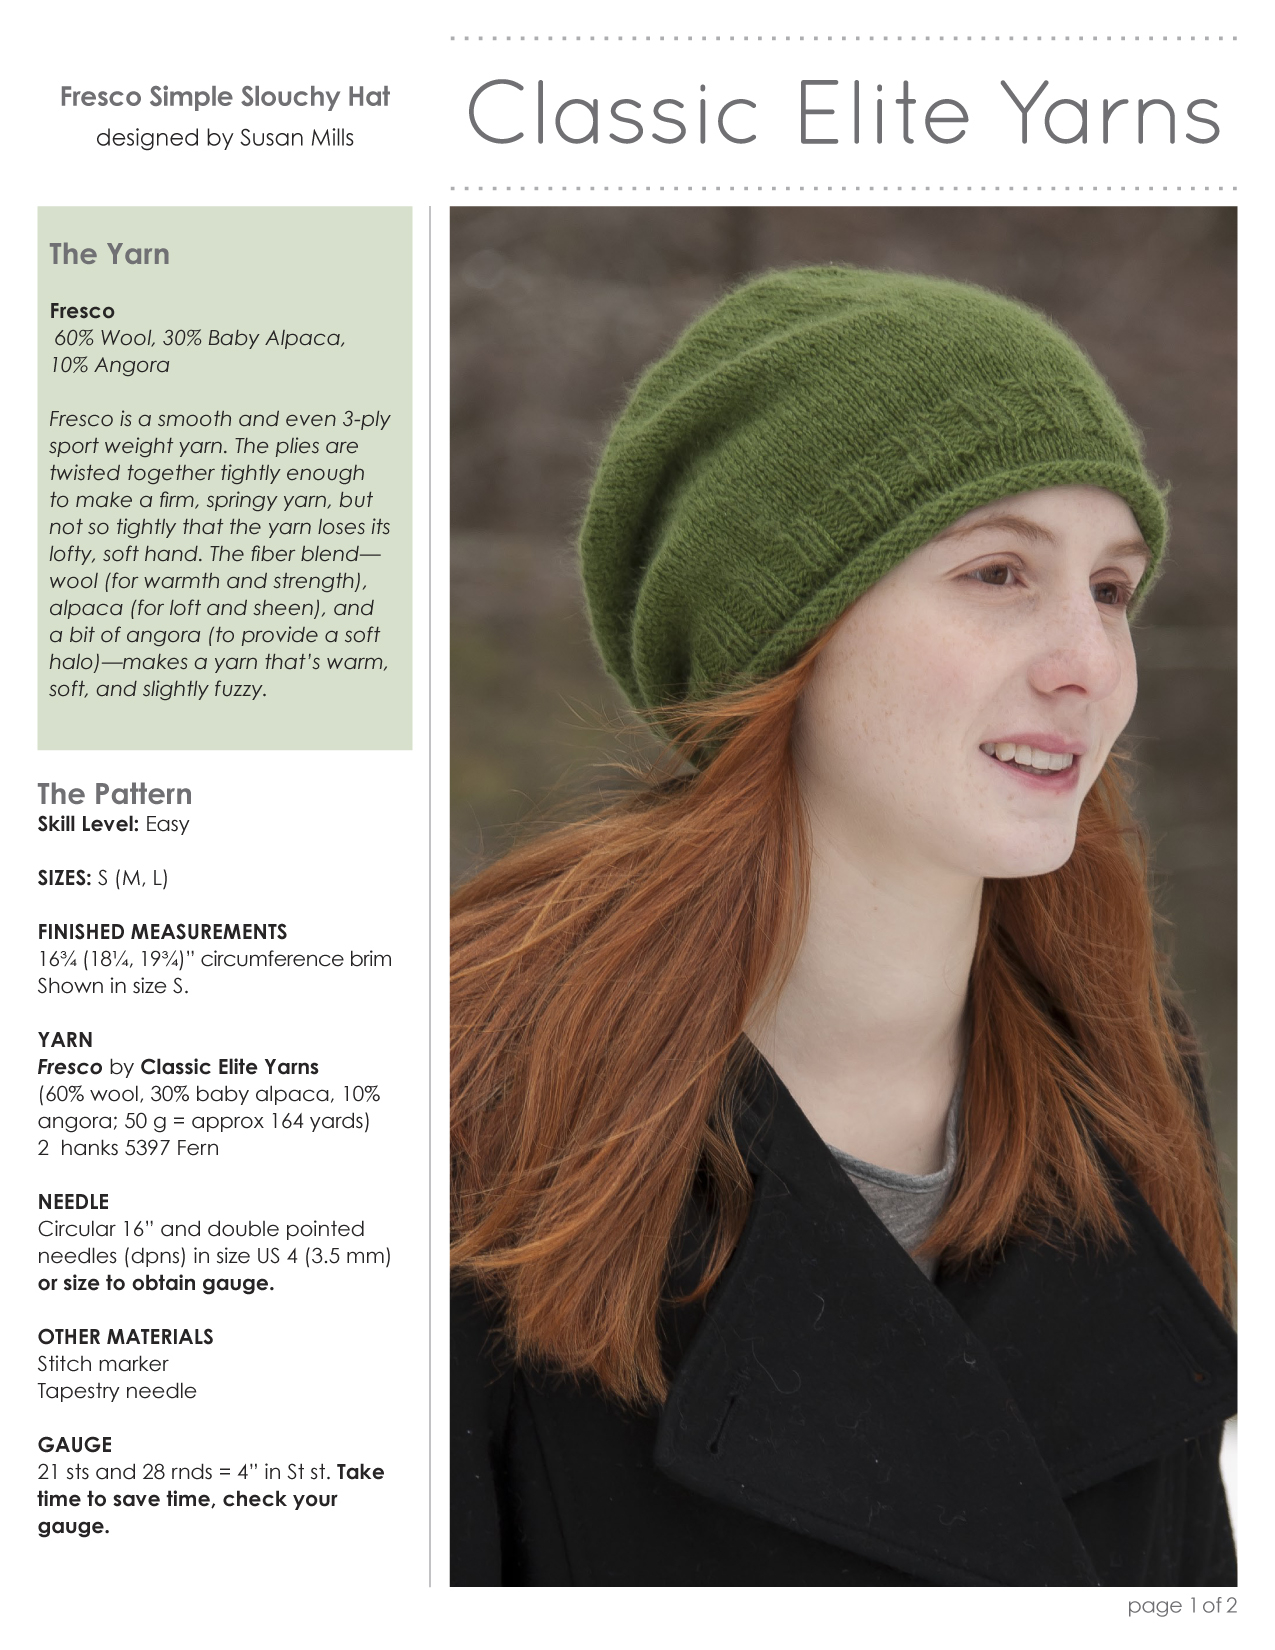 Knitted Slouchy Hat Pattern Fresco Simple Slouchy Hat